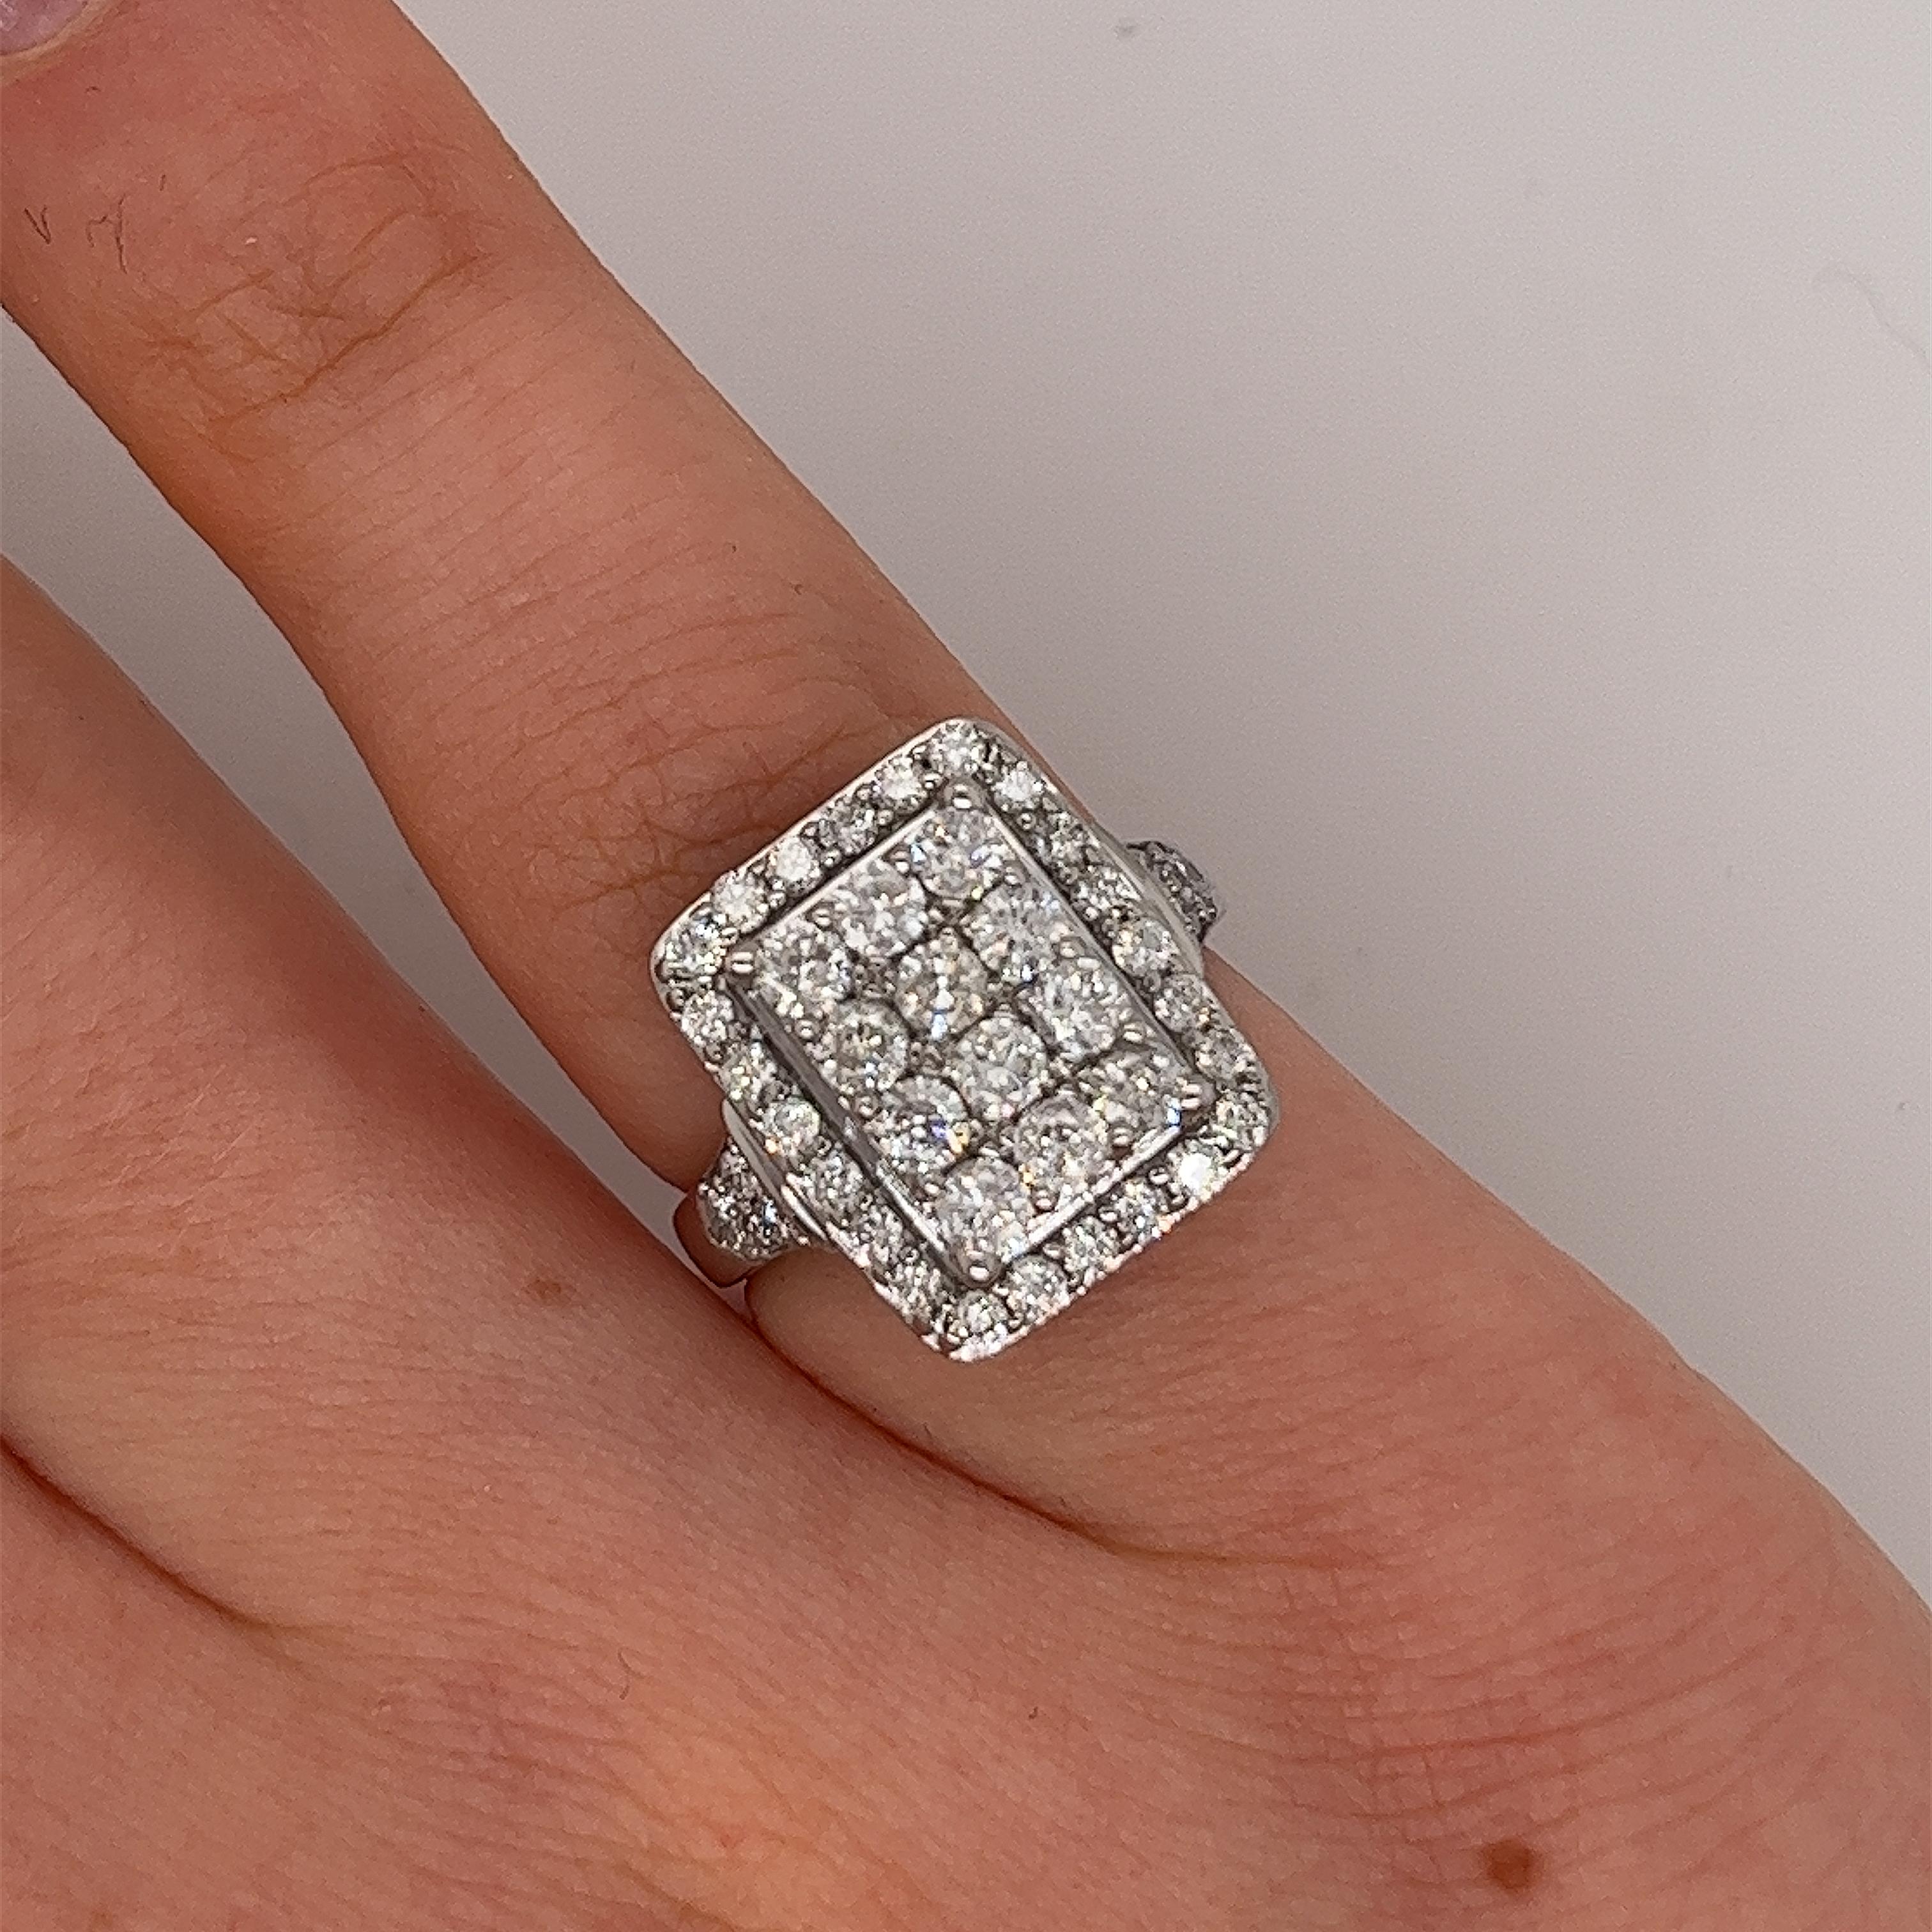 Elegance and sophistication our 
9ct white gold 1.20ct rectangle-shaped diamond ring 
with diamond-set shoulders, designed to captivate hearts
and commemorate eternal love.

Total Diamond Weight: 1.20ct
Diamond Colour: H
Diamond Clarity: I1
Width of